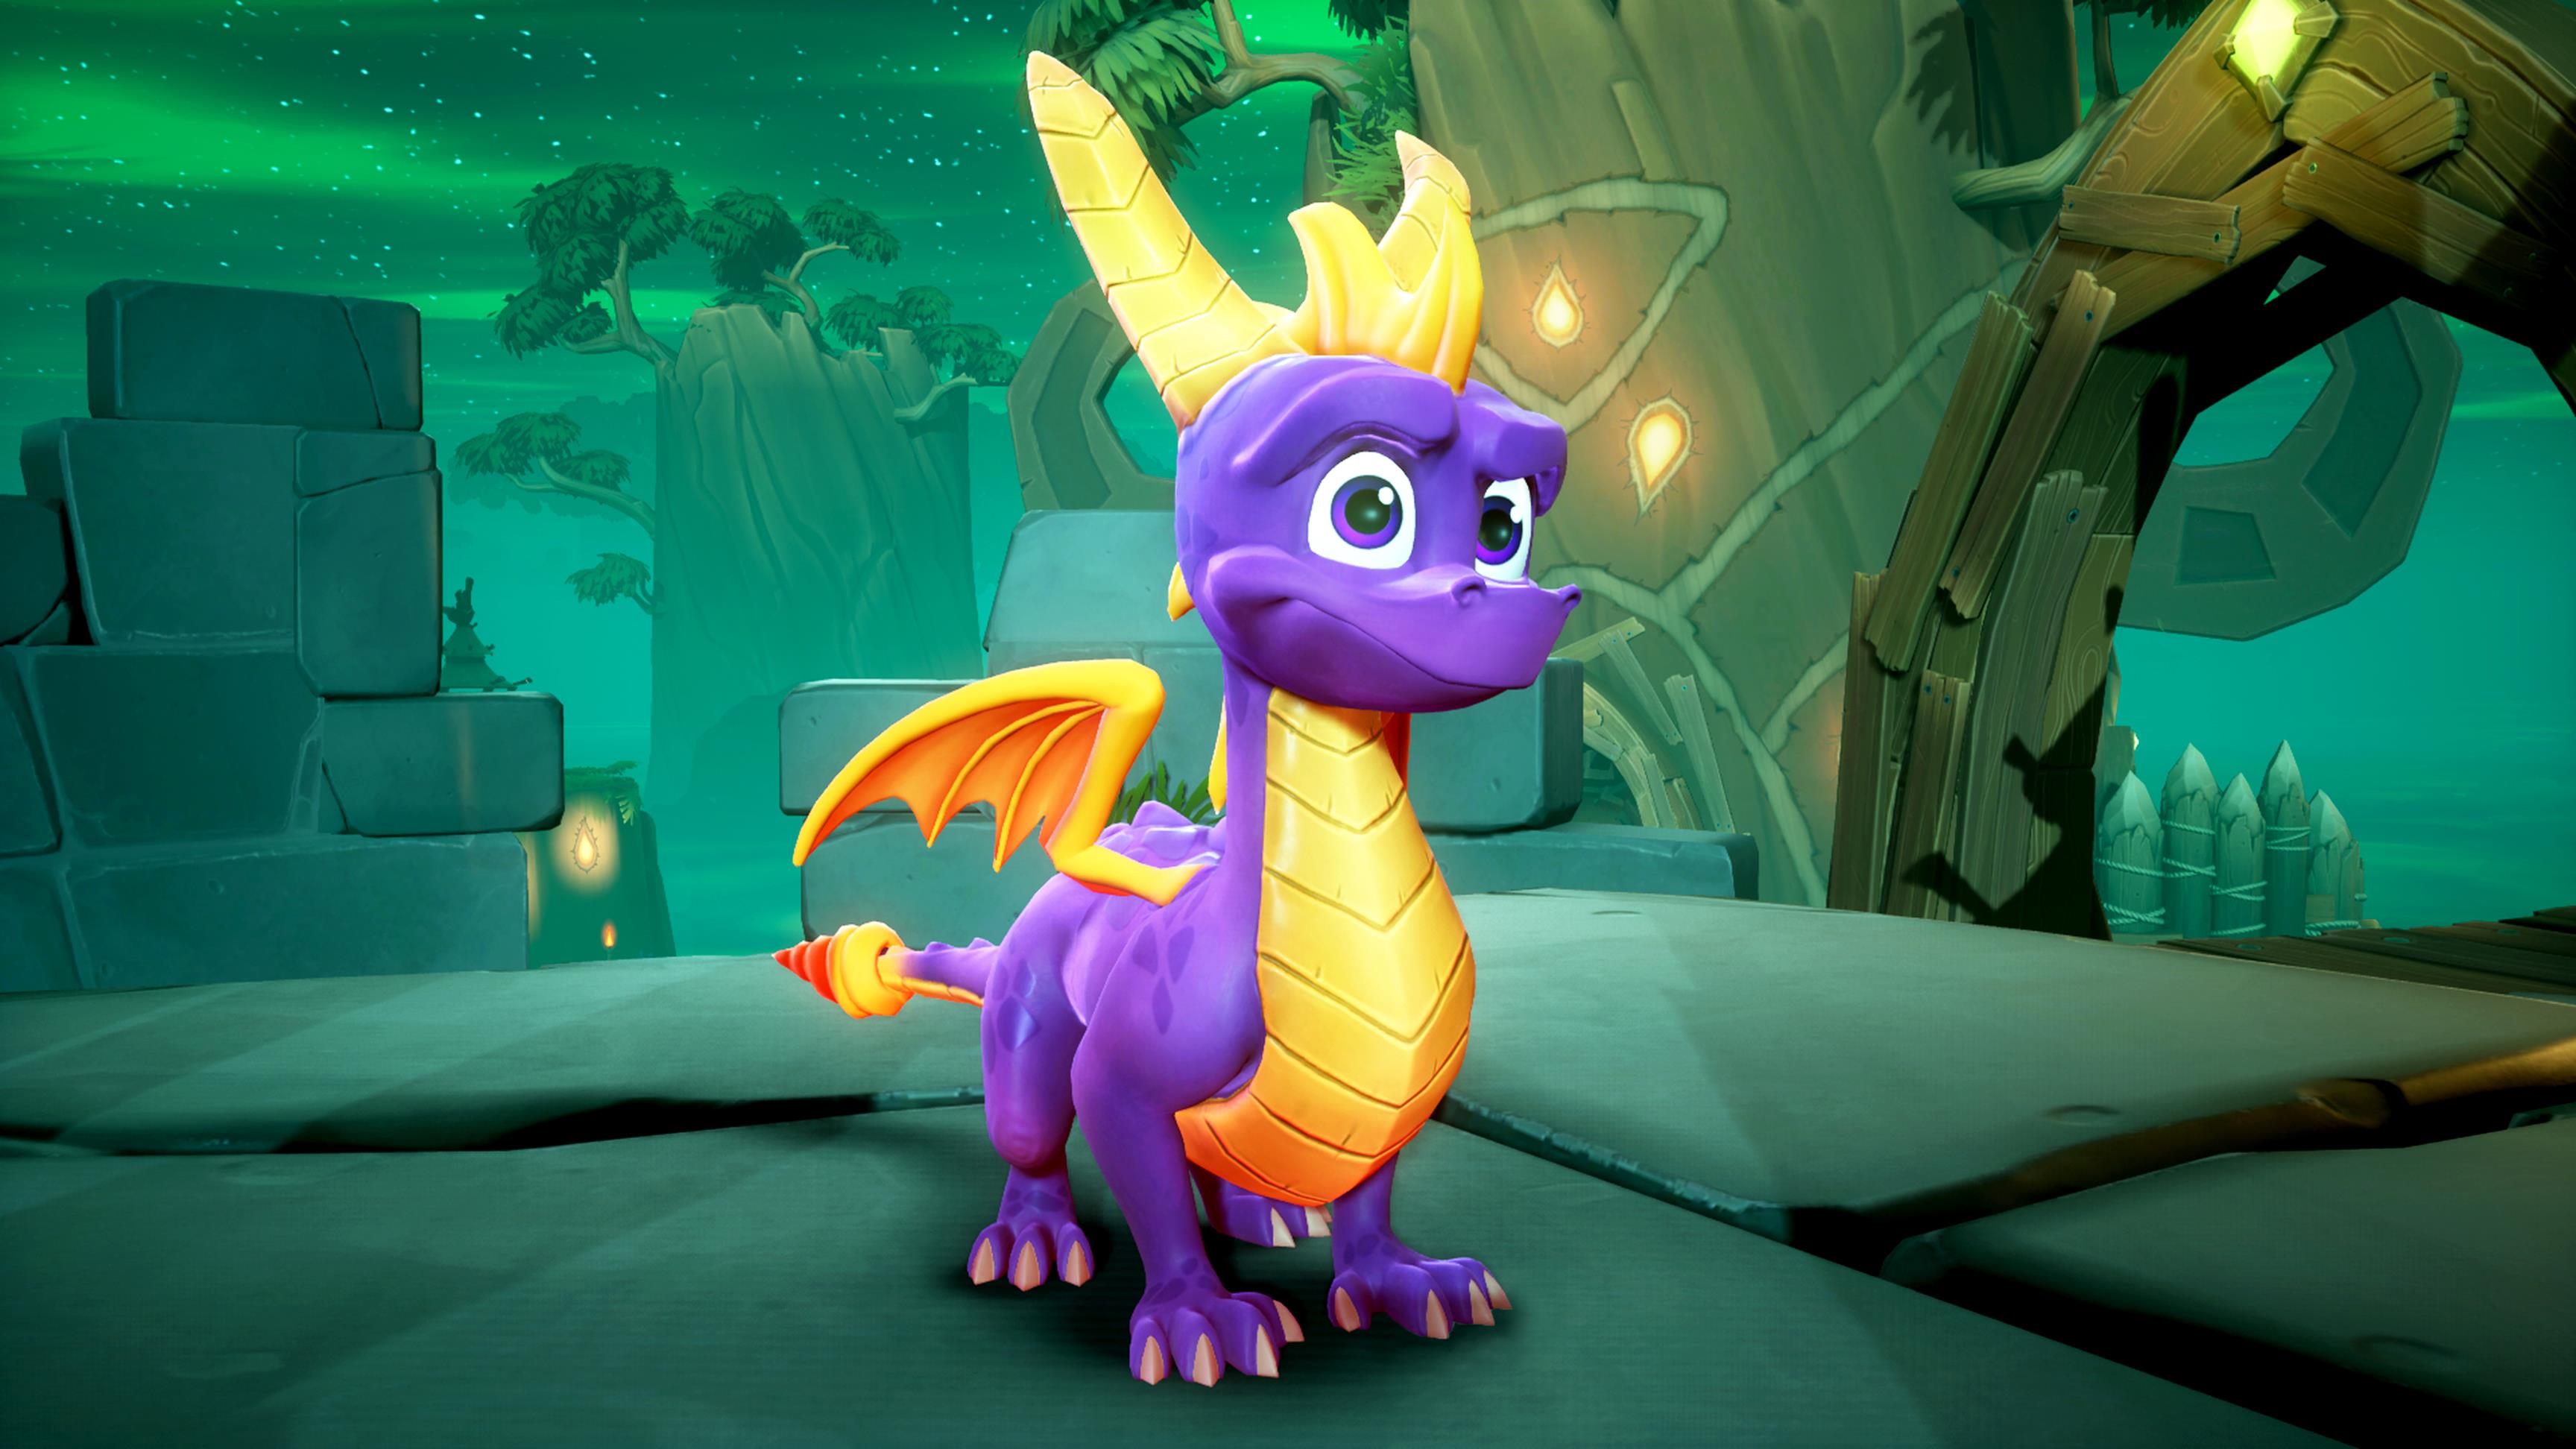 Image for Spyro Reignited Trilogy lets you switch between classic and remastered soundtracks, original composer returns